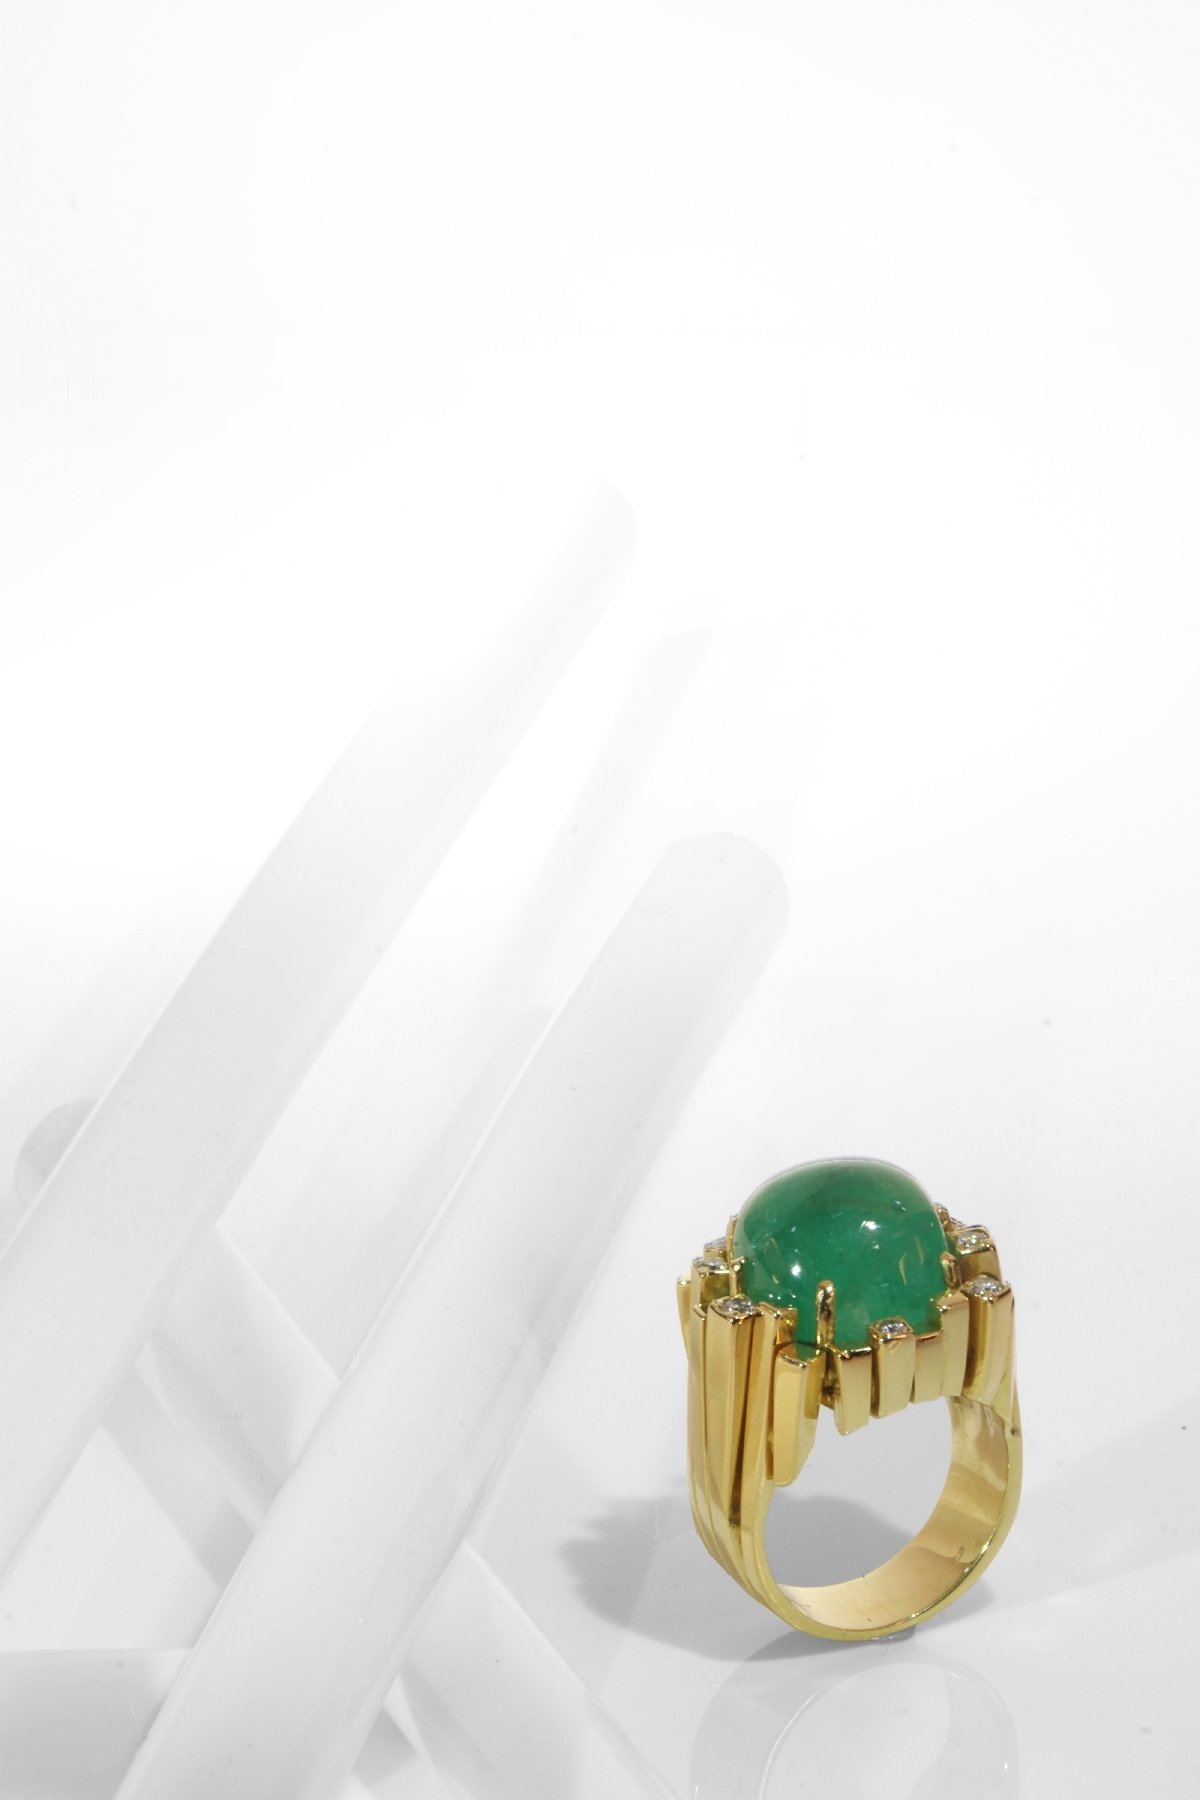 Click the picture to get to see this Seventies Modernistic Artist Design ring with large emerald and diamonds.